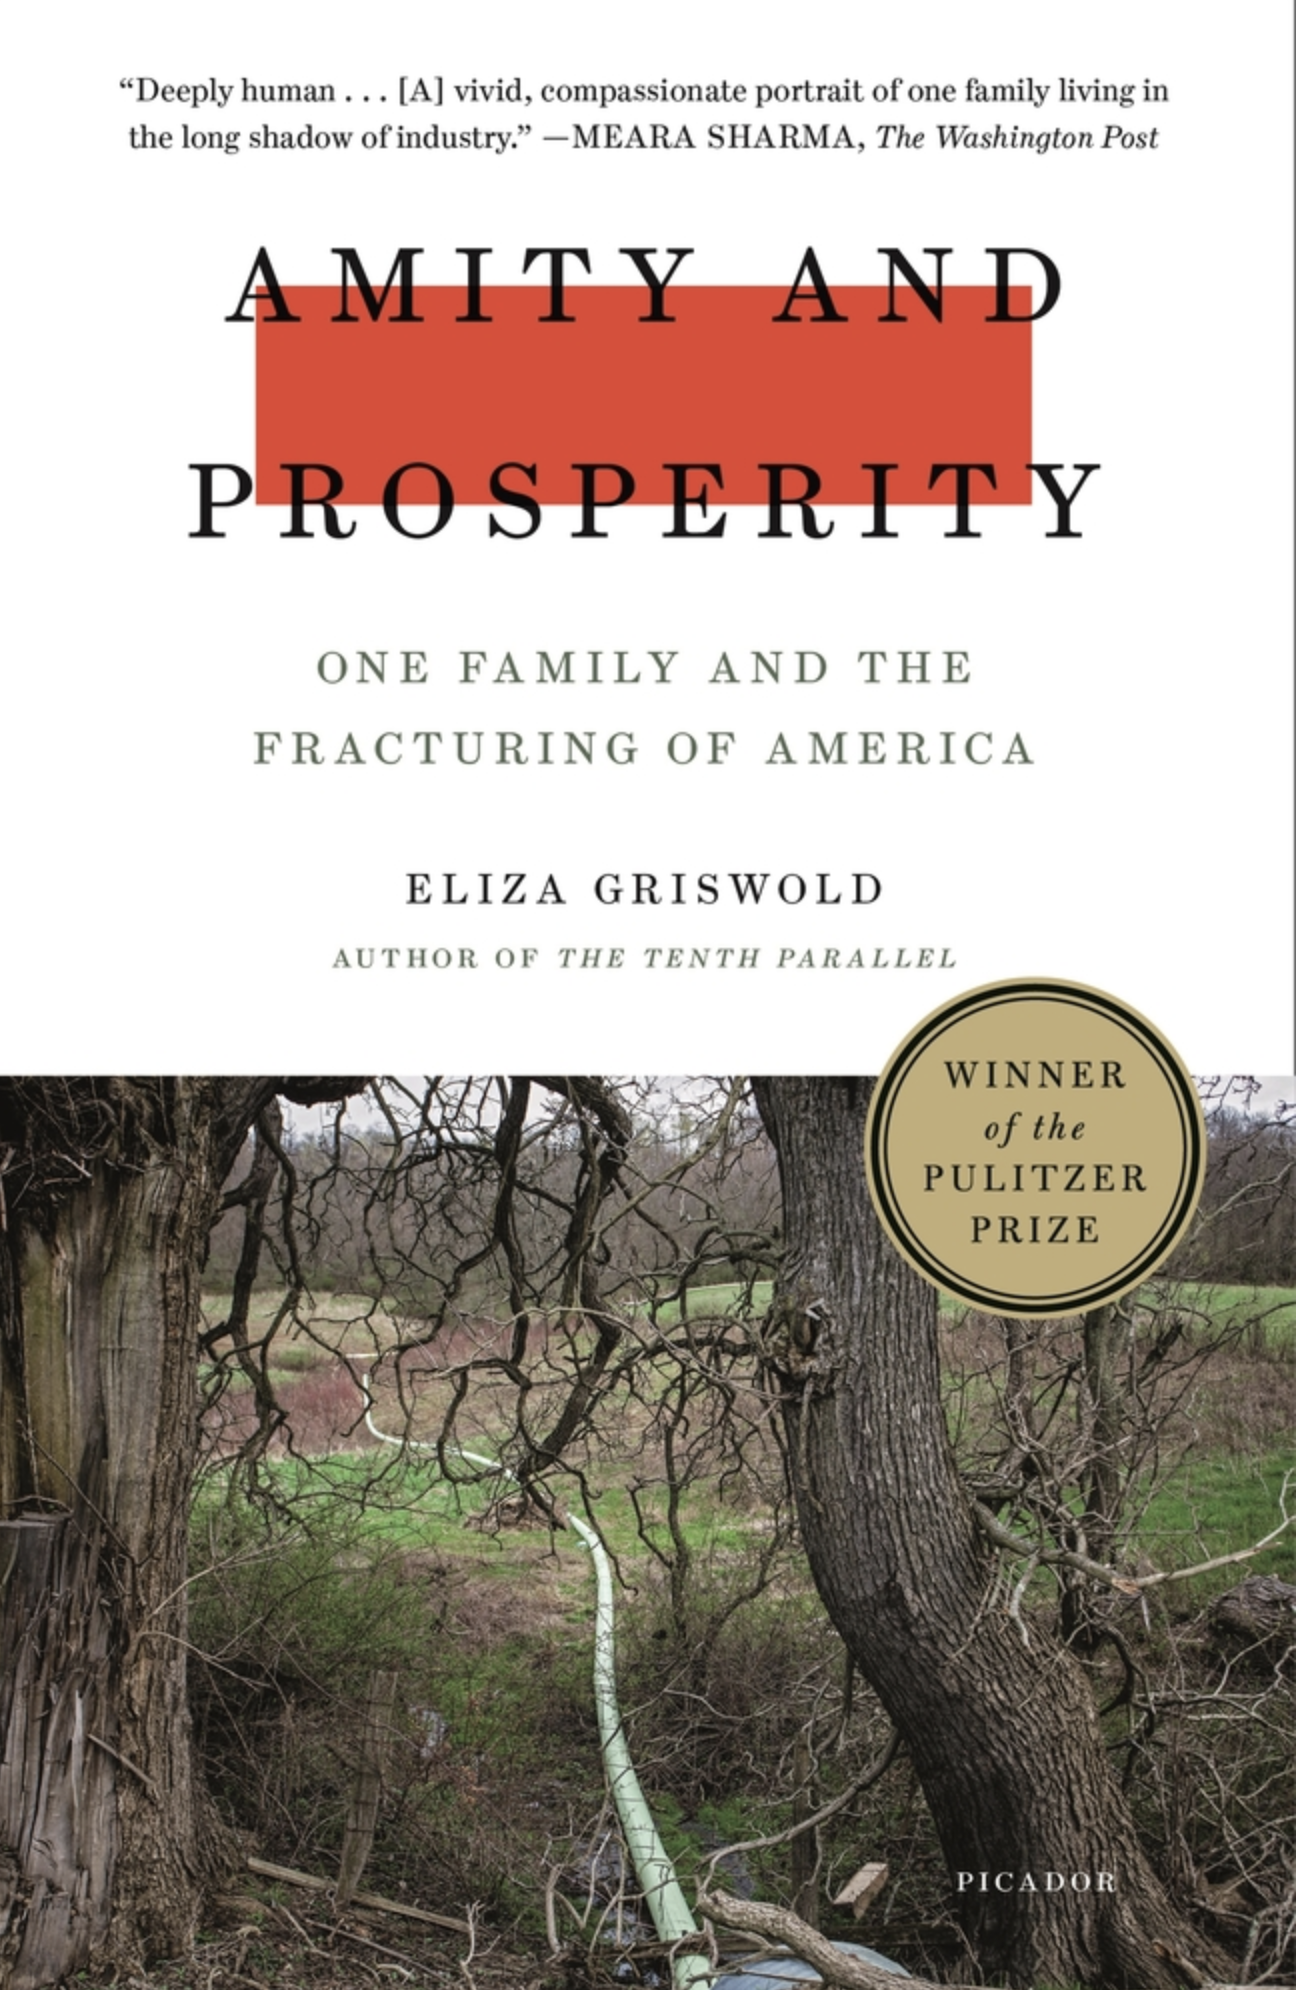 Amity and Prosperity book cover